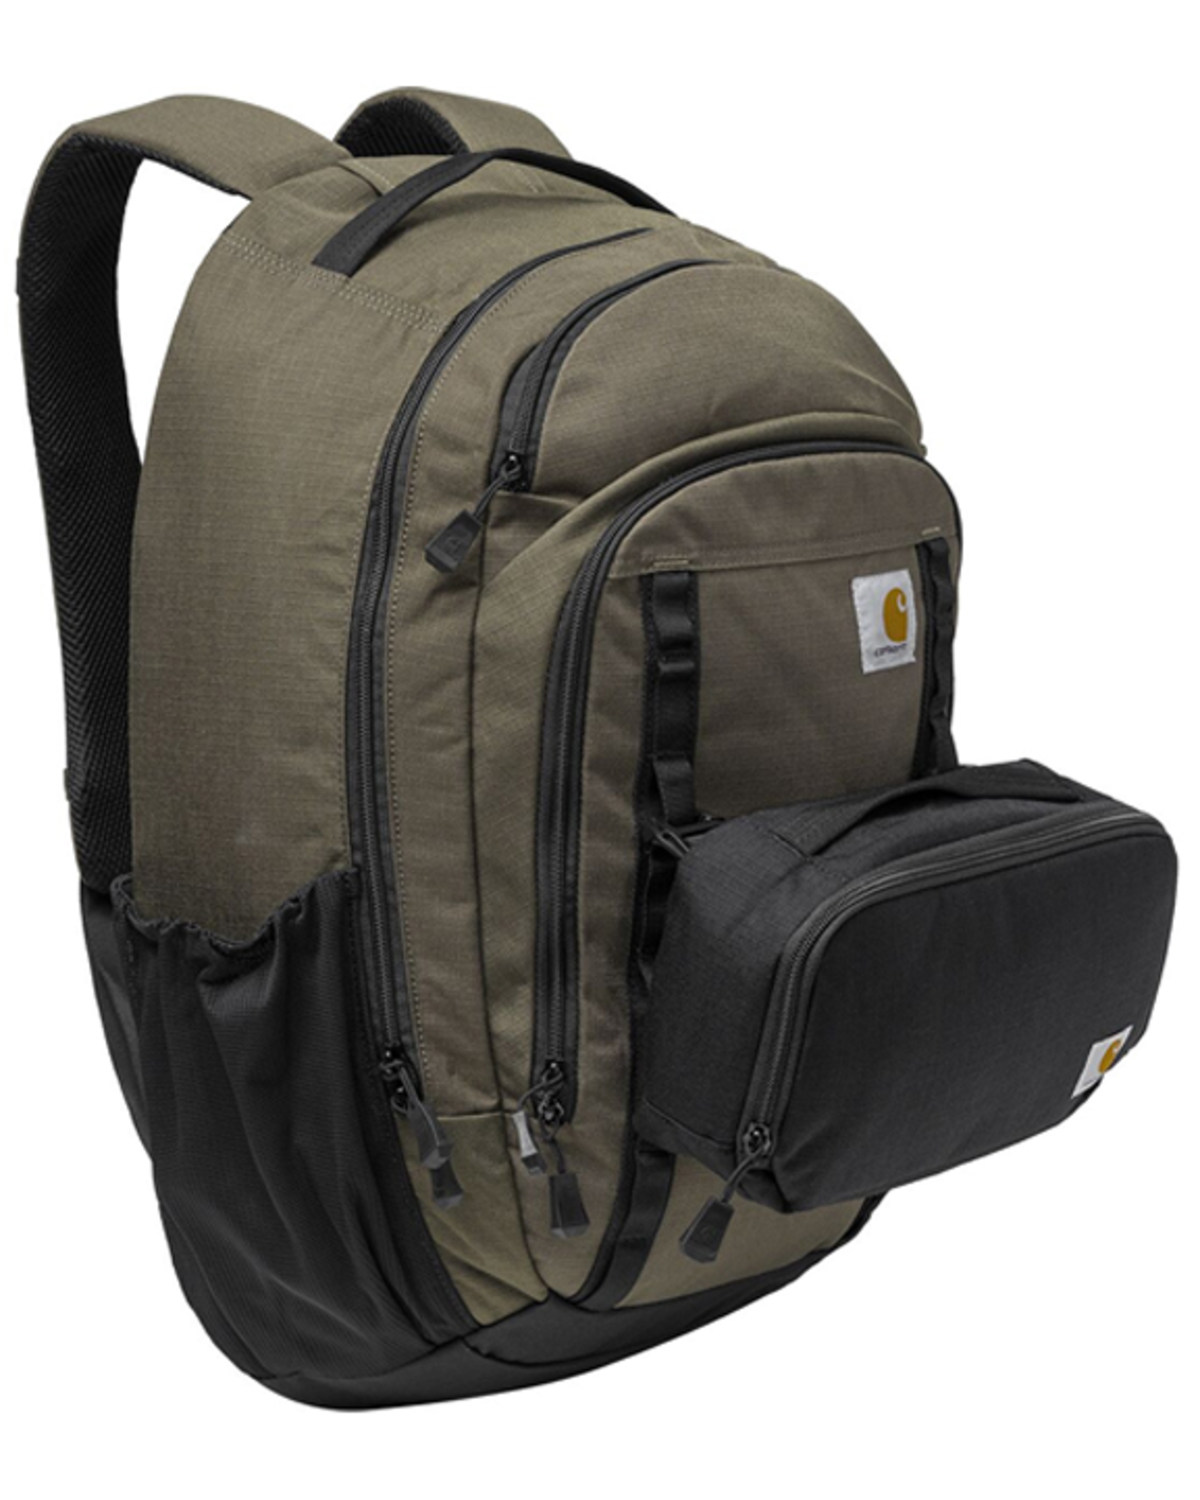 Carhartt Cargo Series 25L Daypack 3-Can Cooler Backpack